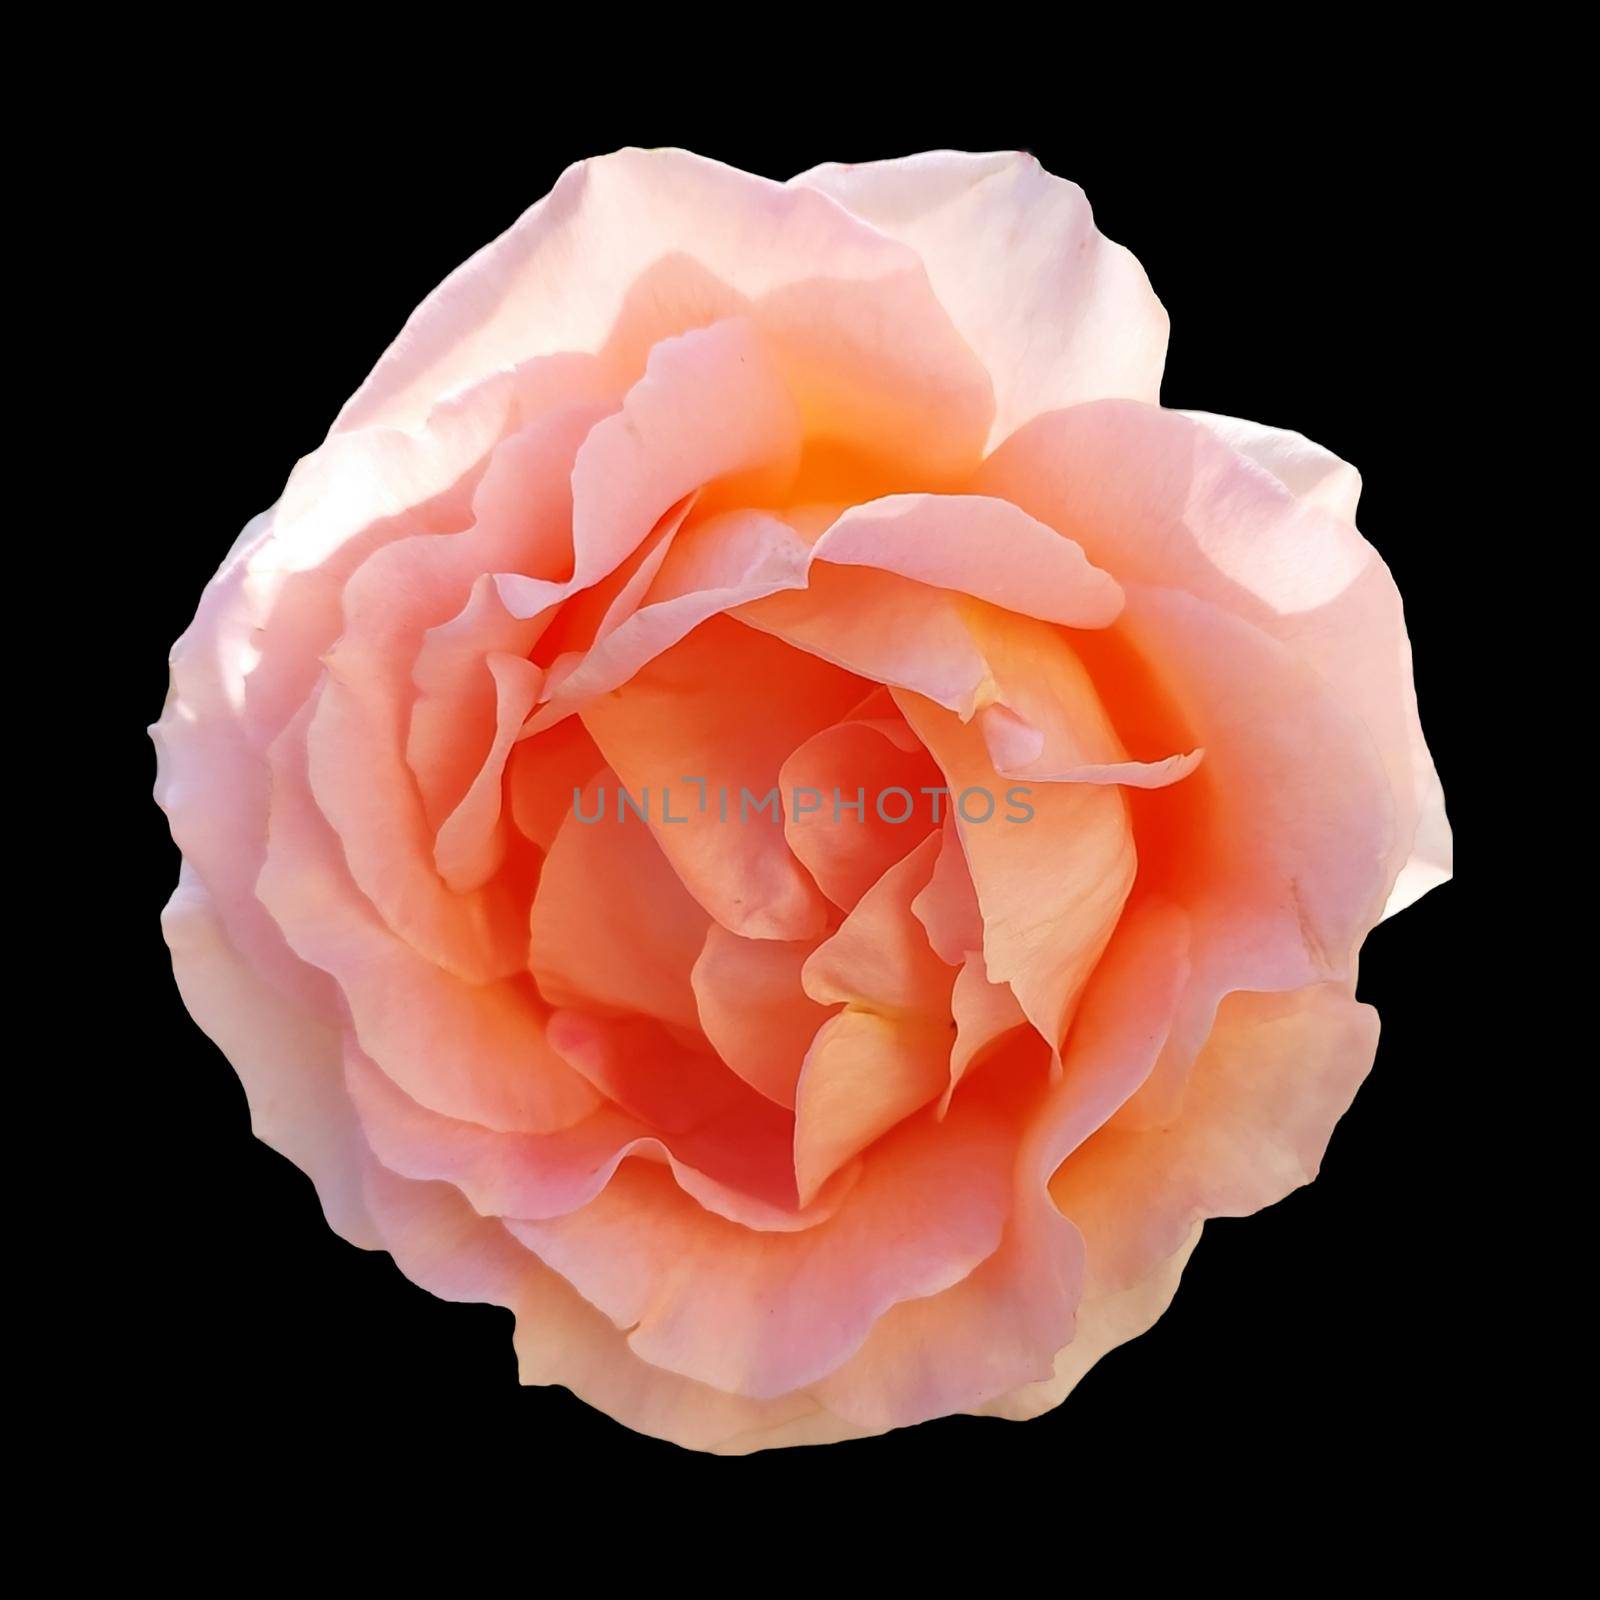 pink rose isolated on black background dicut with clipping path. High quality photo